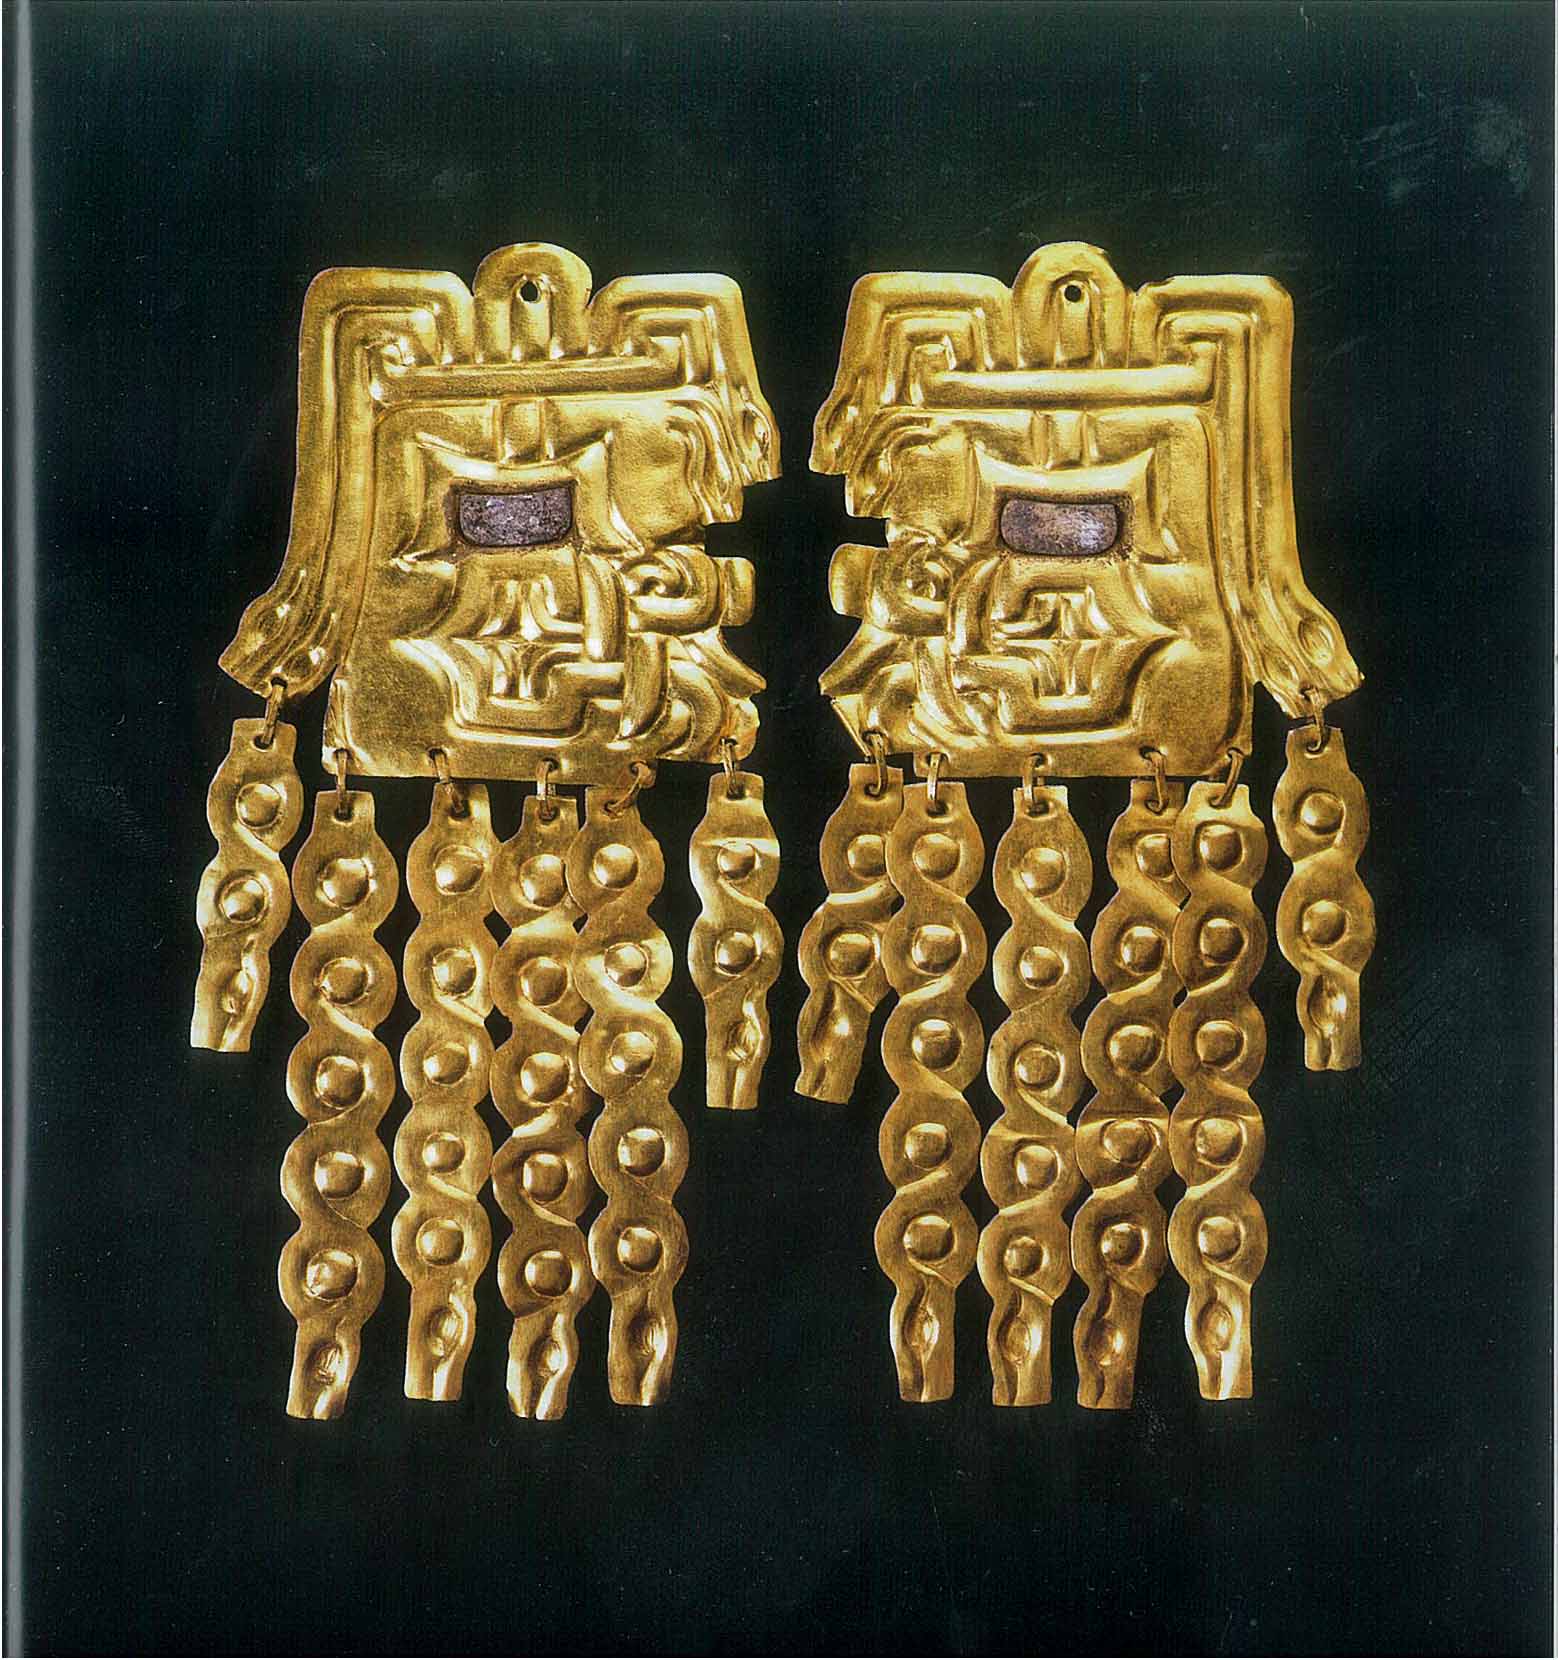 Gold Idols, Chavin Culture (1000-200 B.C.). Courtesy of Mr. Roberto Gheller Doig: See Acknowledgements in Sponsors, reference (5)